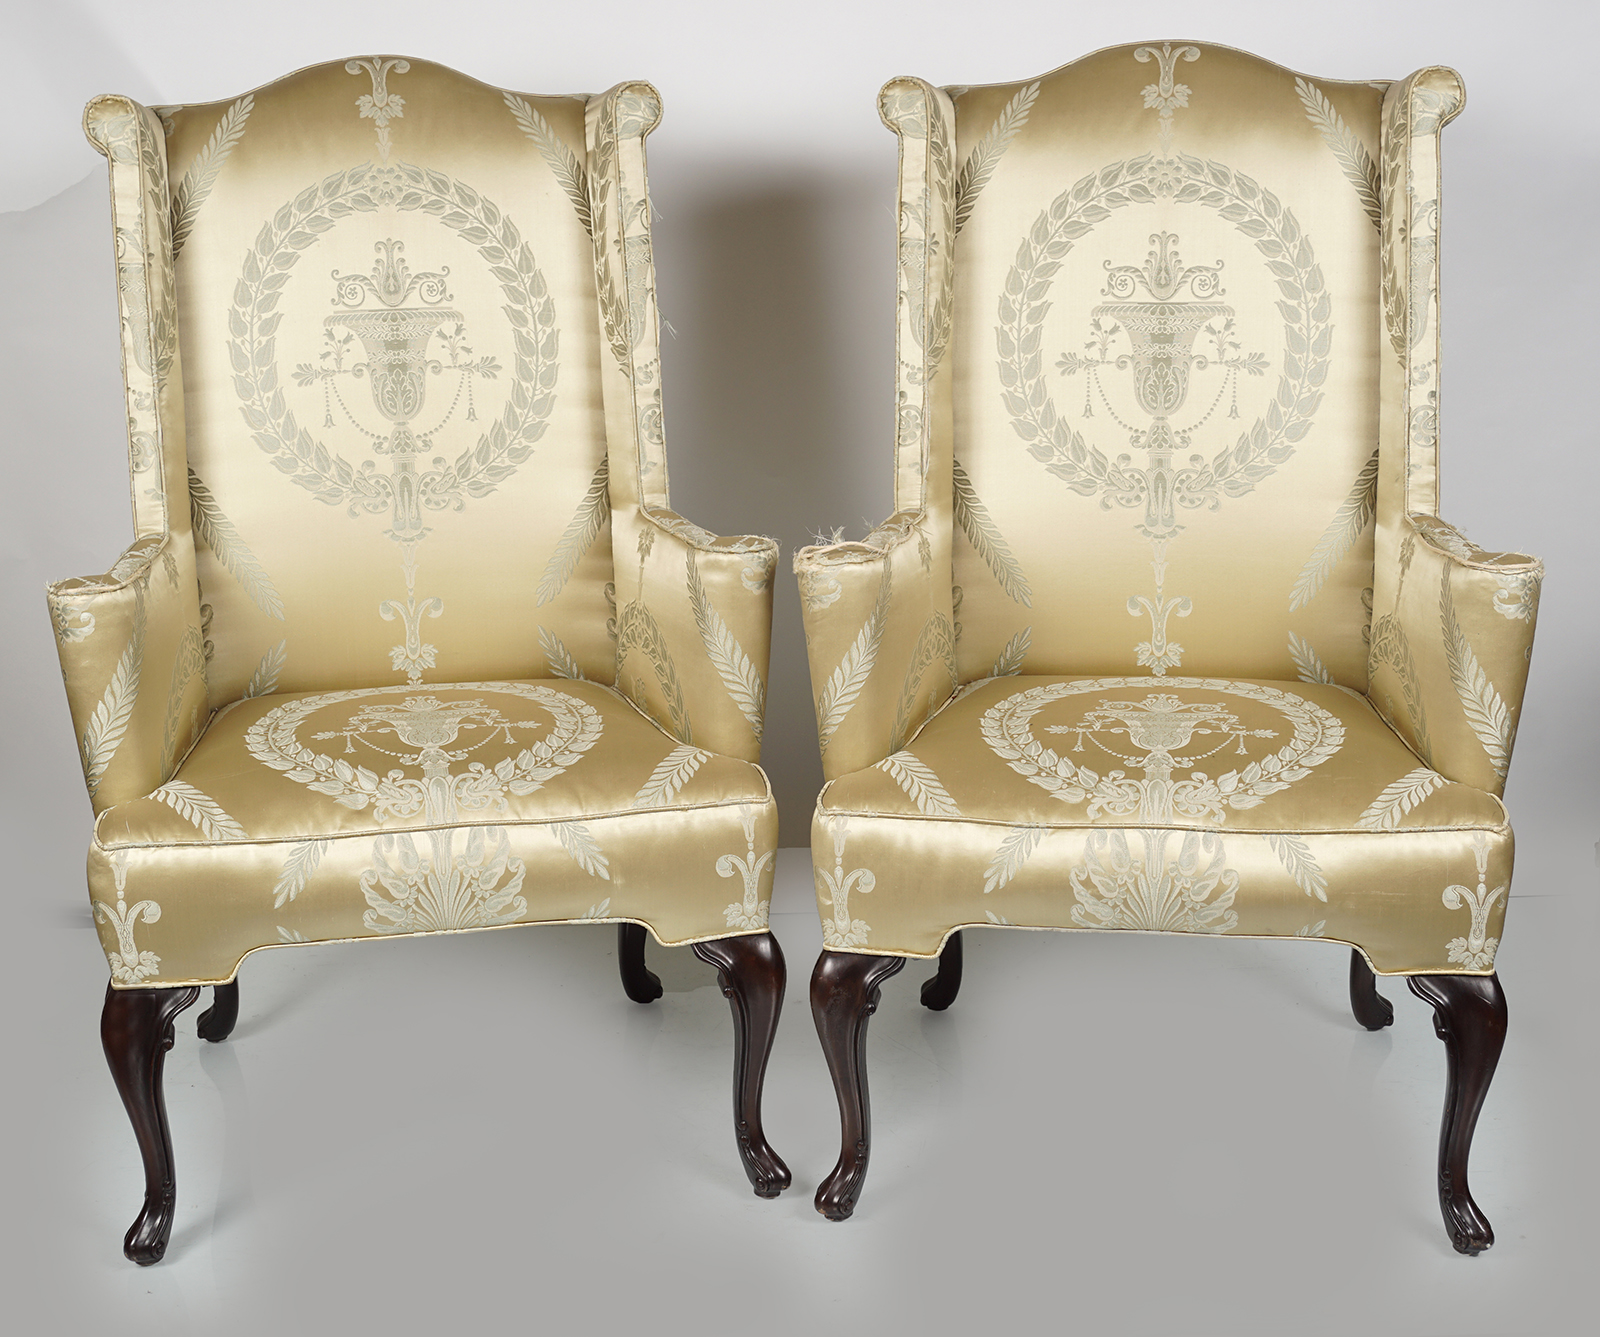 PAIR OF LATE 19TH-CENTURY WING ARMCHAIRS